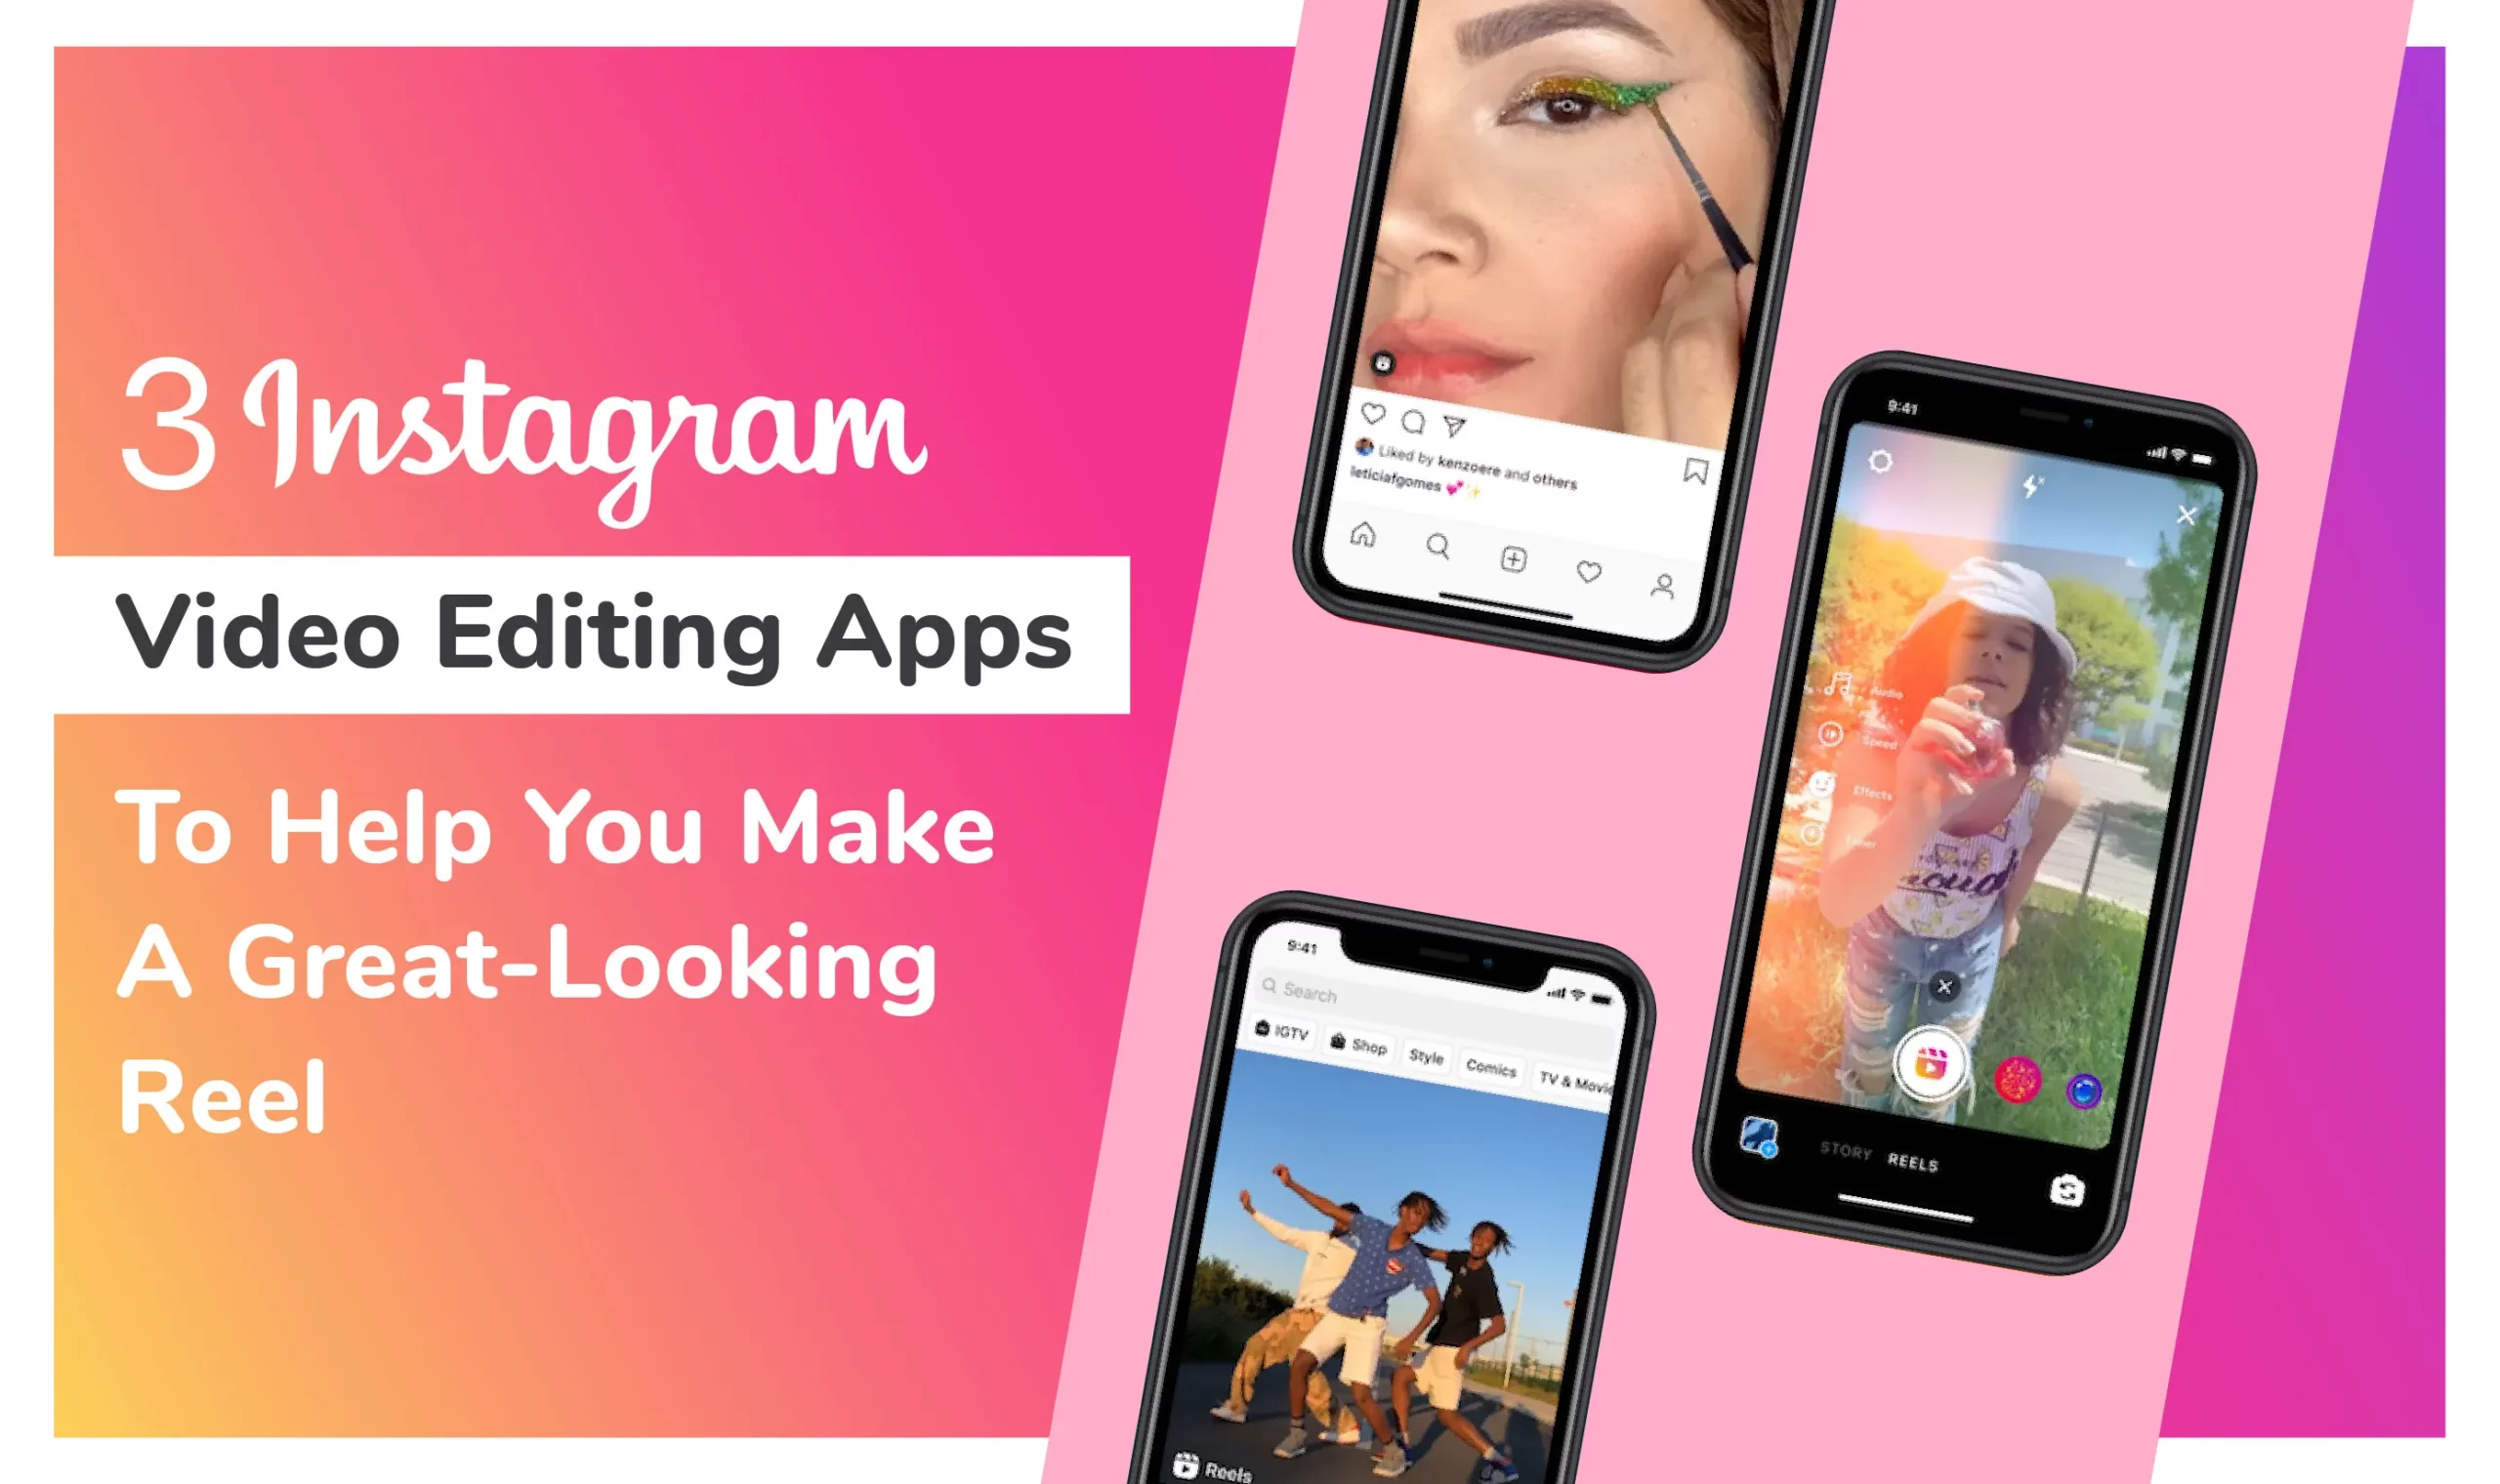 3 Instagram Video Editing Apps To Help You Make A Great-Looking Reel - Wavel